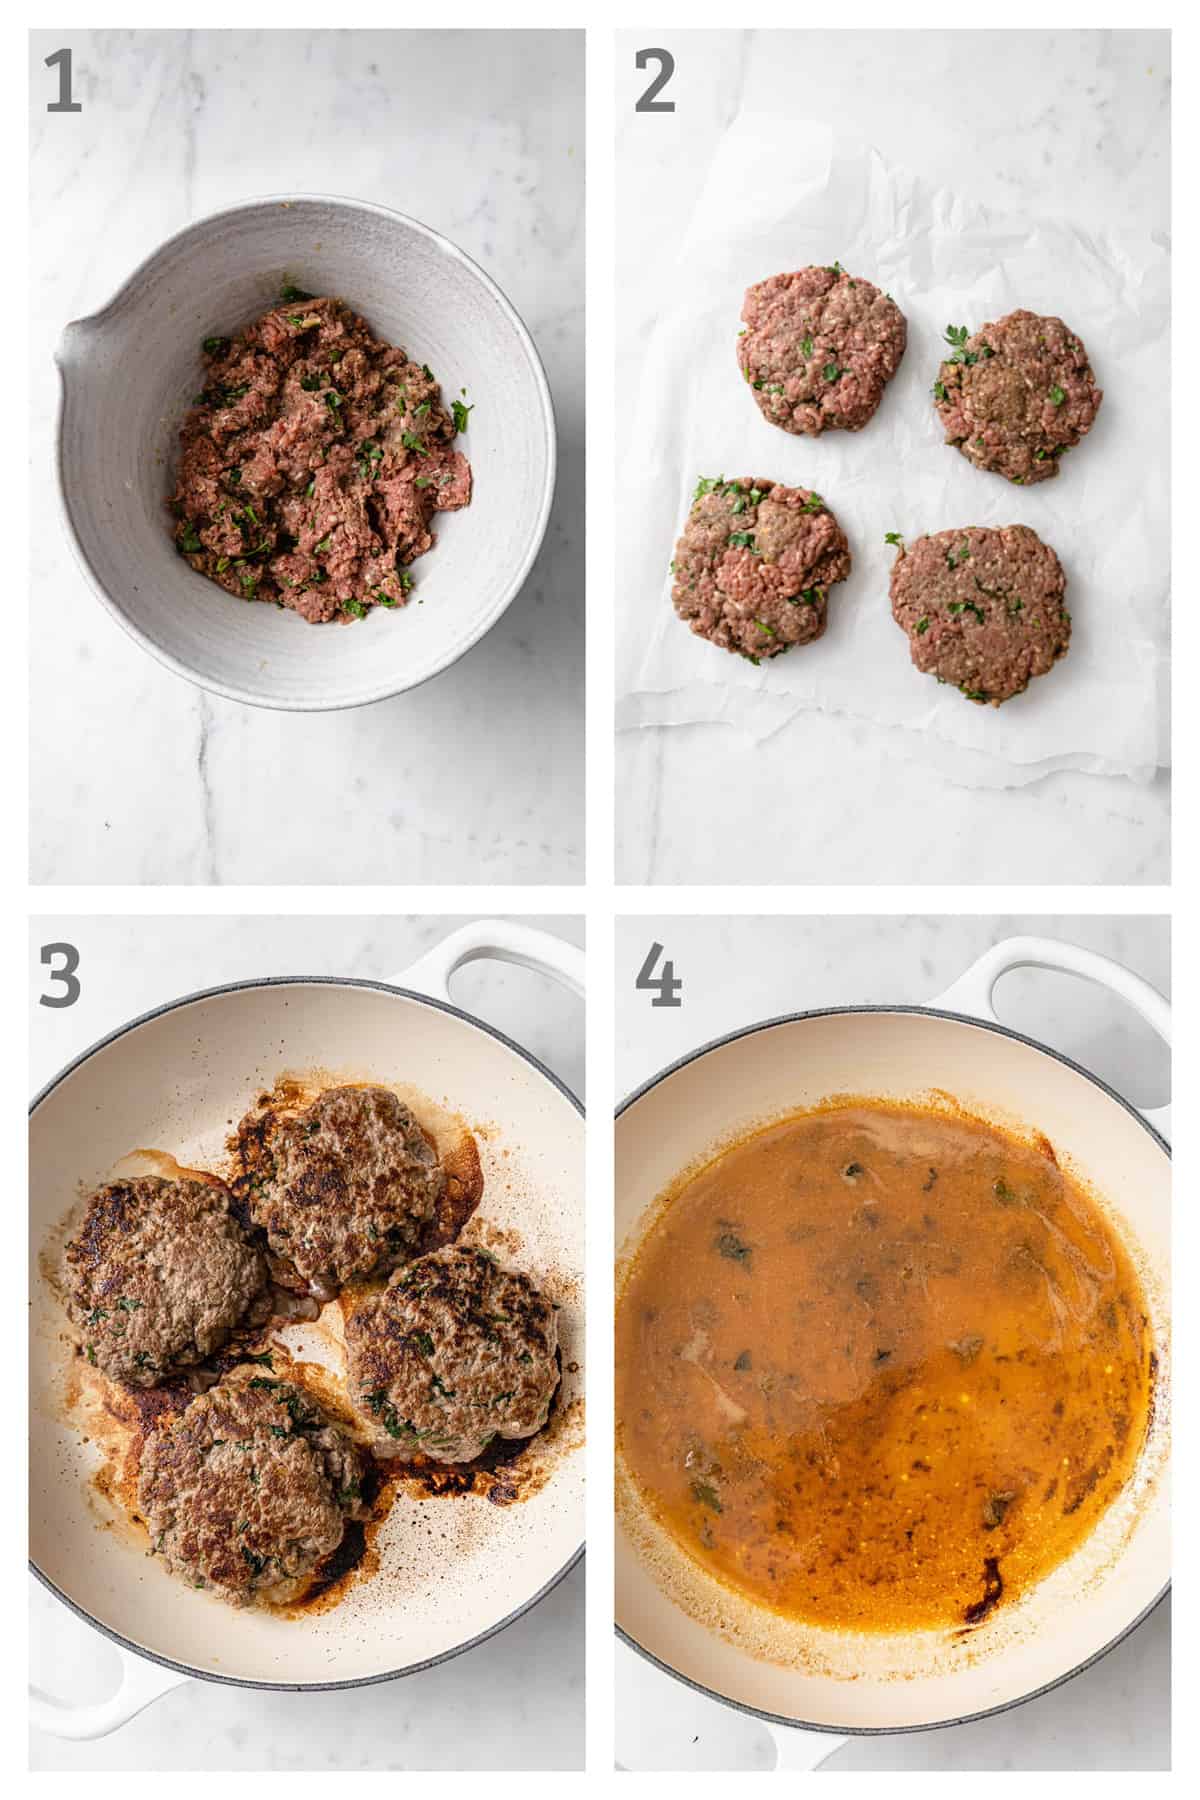 Step by step instructions for how to make beef stroganoff burgers